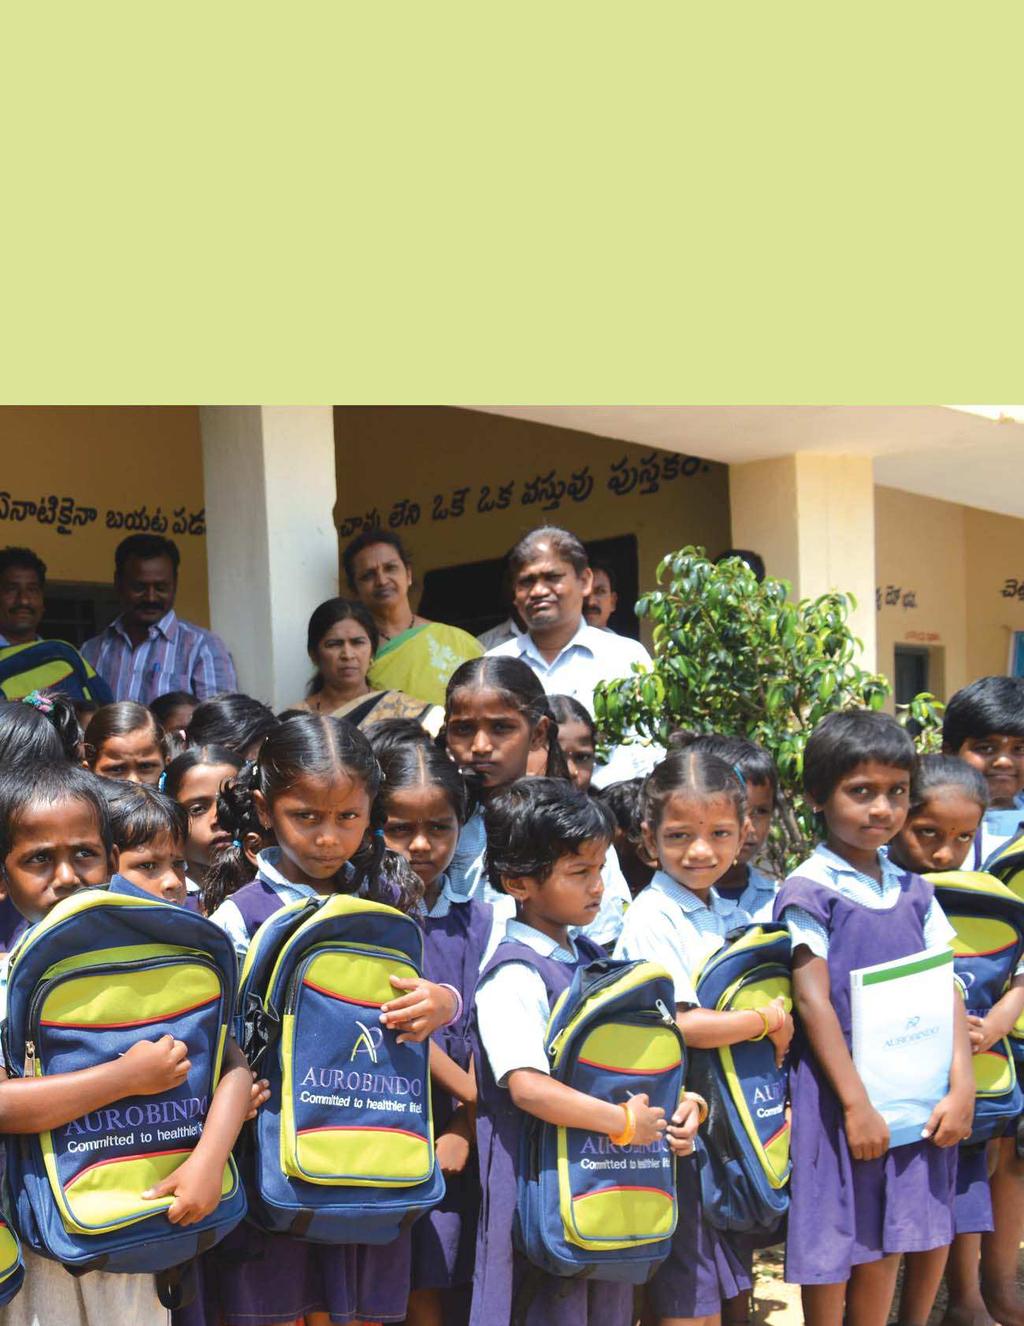 Under the CSR Education Activity, issued 3627 School Bags & 25135 School Books in various Government Schools located in Telangana State.